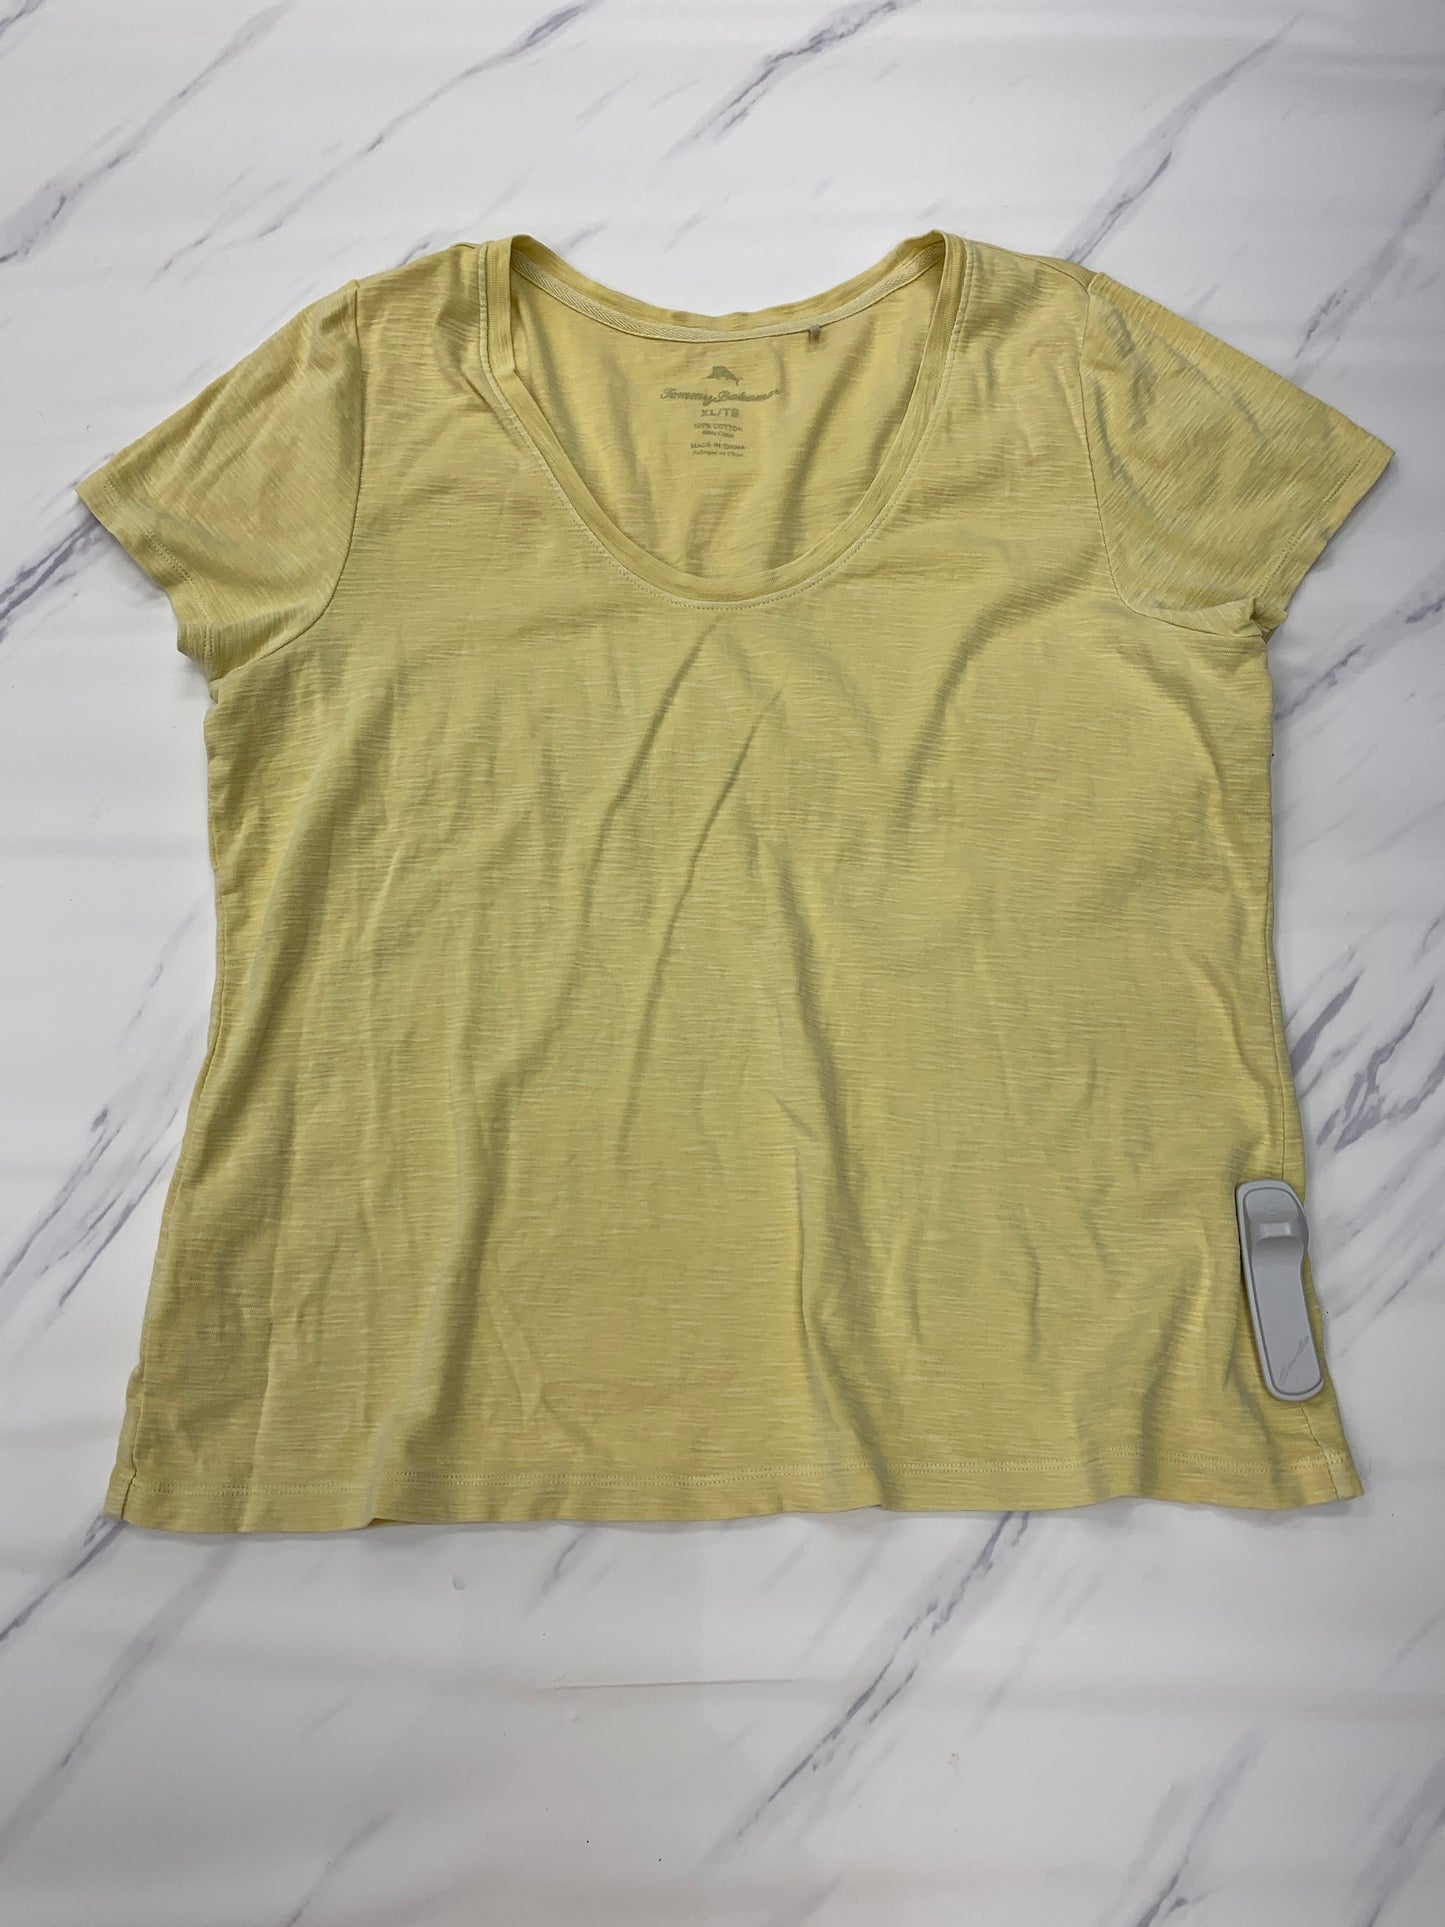 Yellow Top Short Sleeve Tommy Bahama, Size Xl